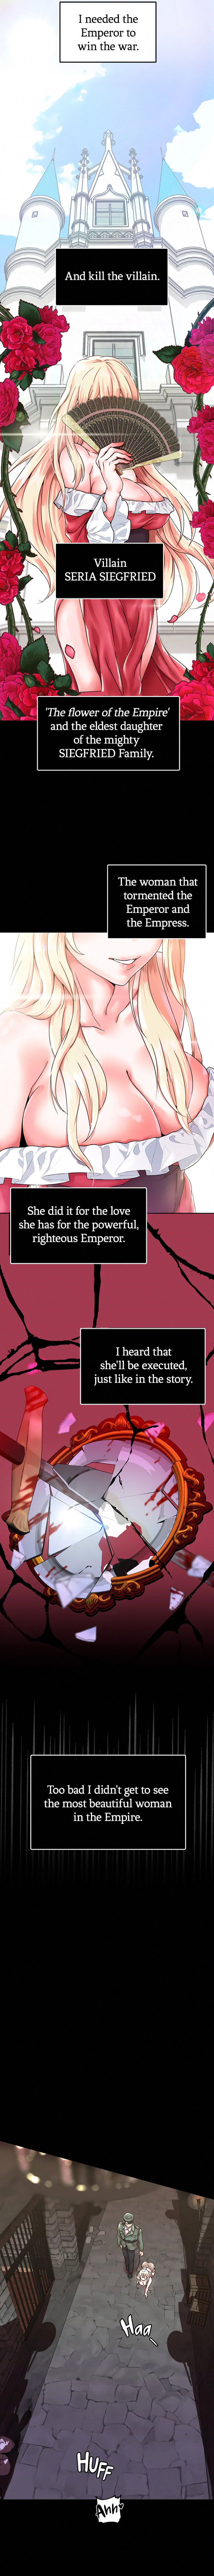 Breaking A Romantic Fantasy Villain - Chapter 1 Page 6